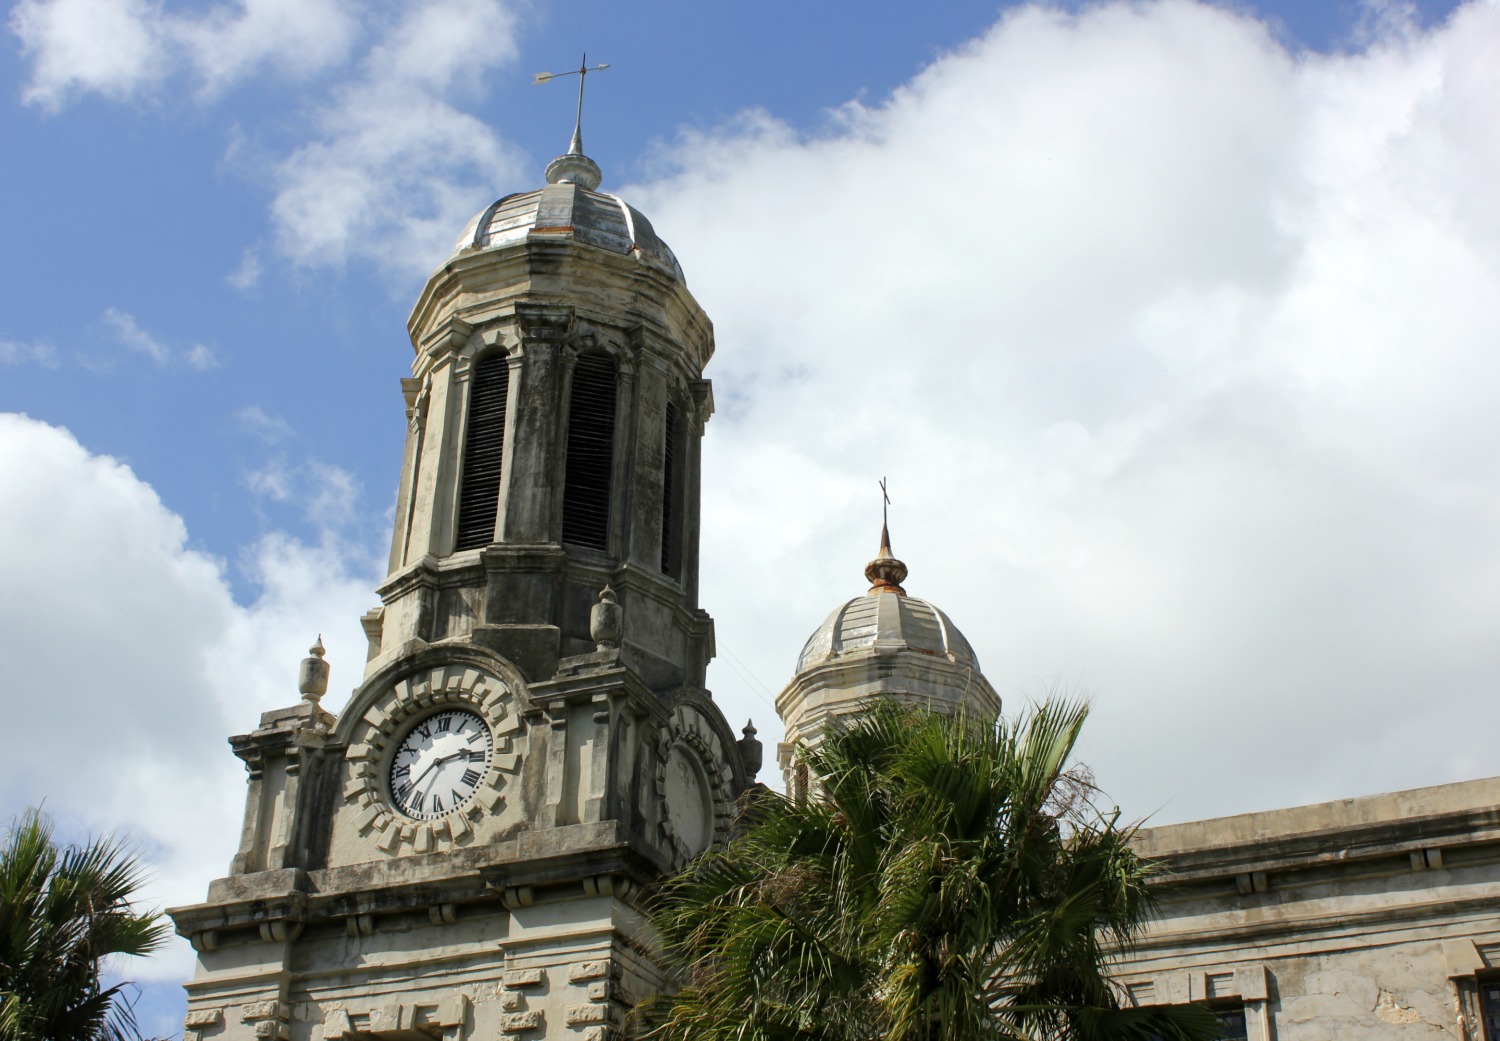 Cathedral towers in St John's on Antigua - 14 reasons to visit Antigua with young kids